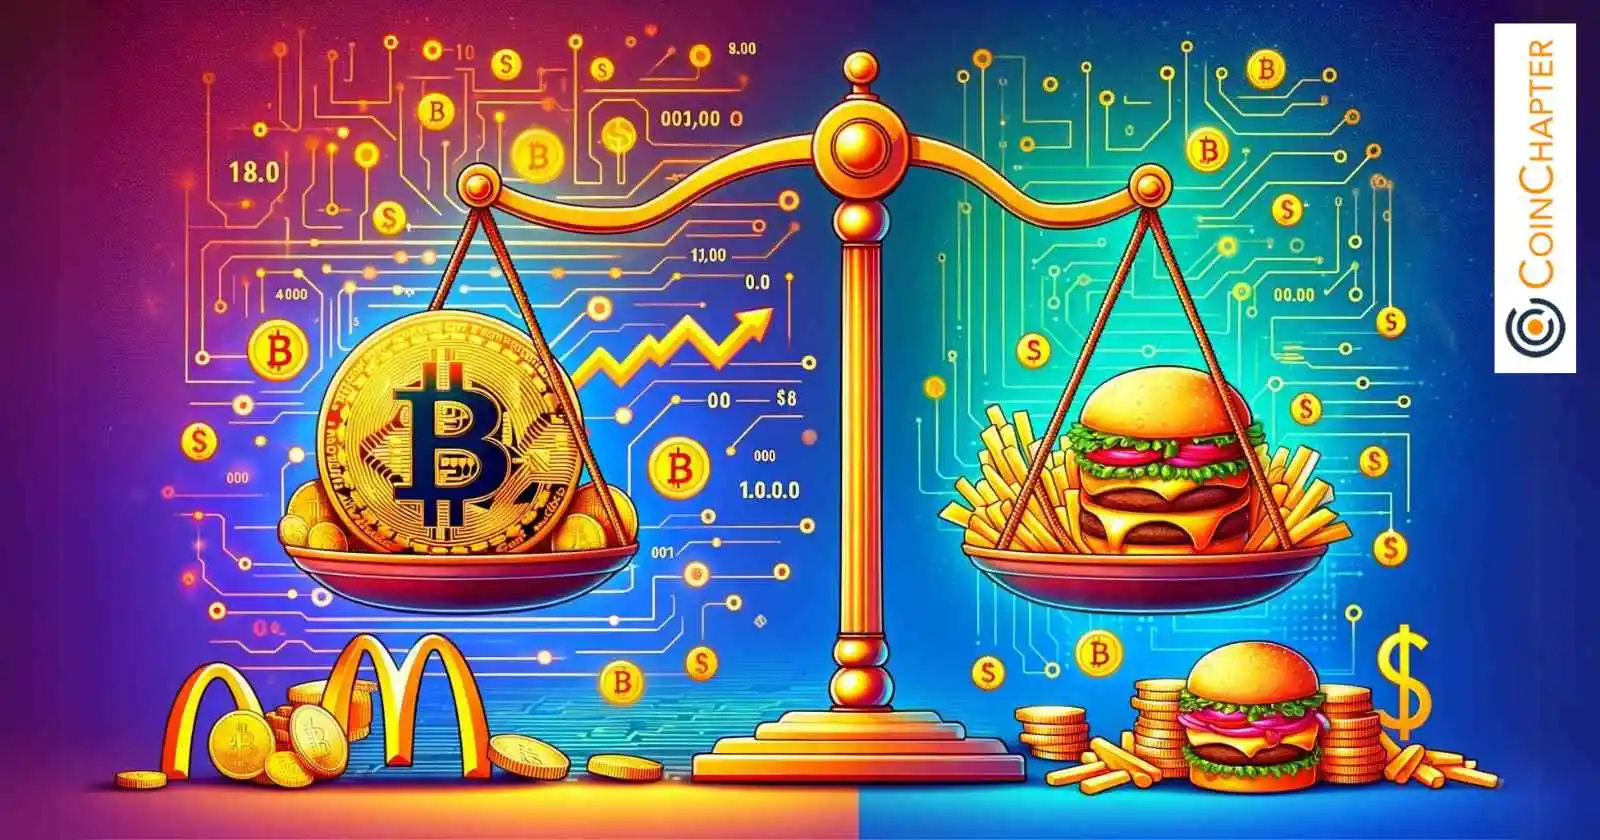 Bitcoin vs. McDonald's: A Decade of Price Comparison Highlights BTC's Journey and Fast Food Inflation